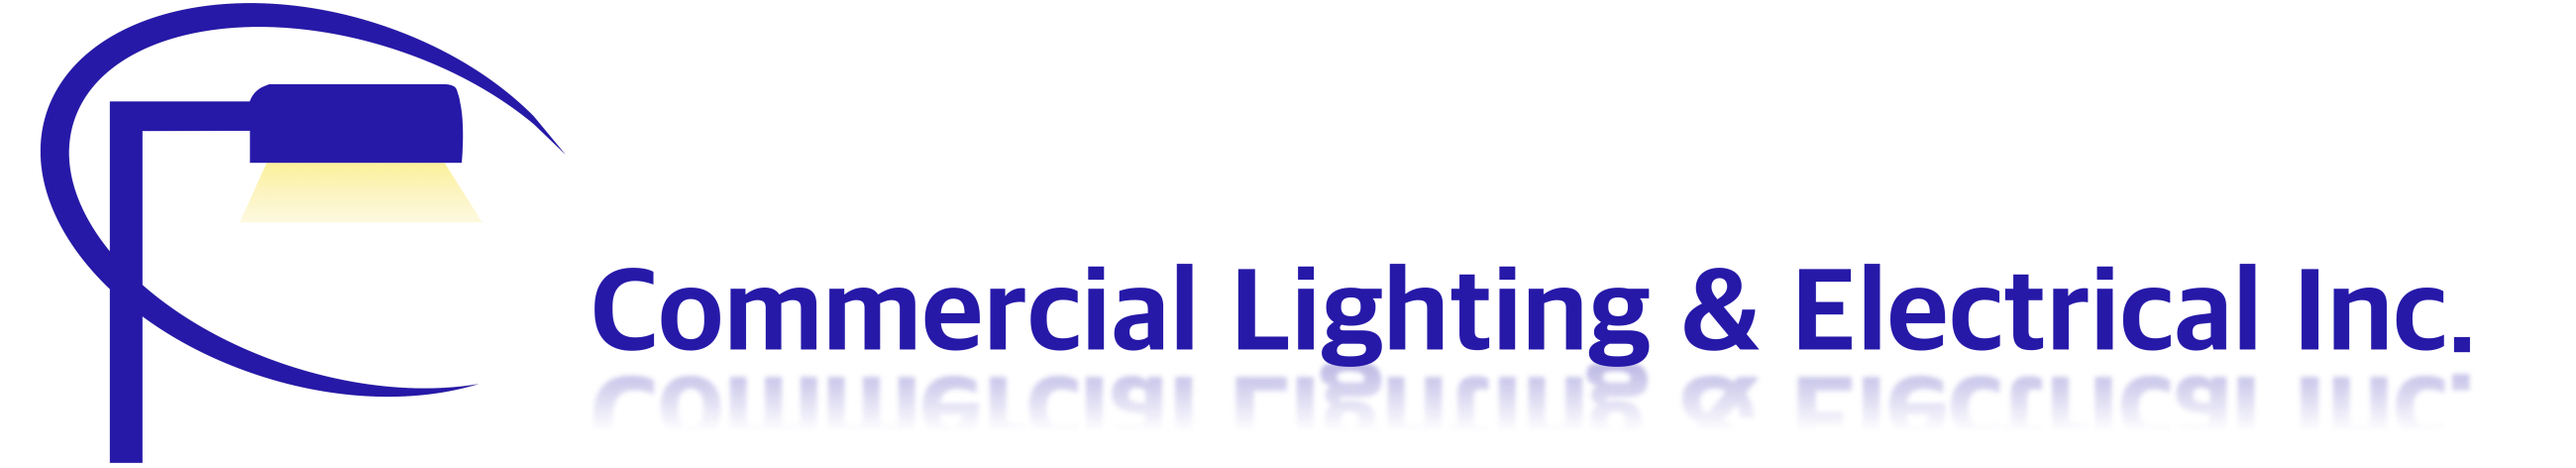 Commercial Lighting & Electrical Inc.